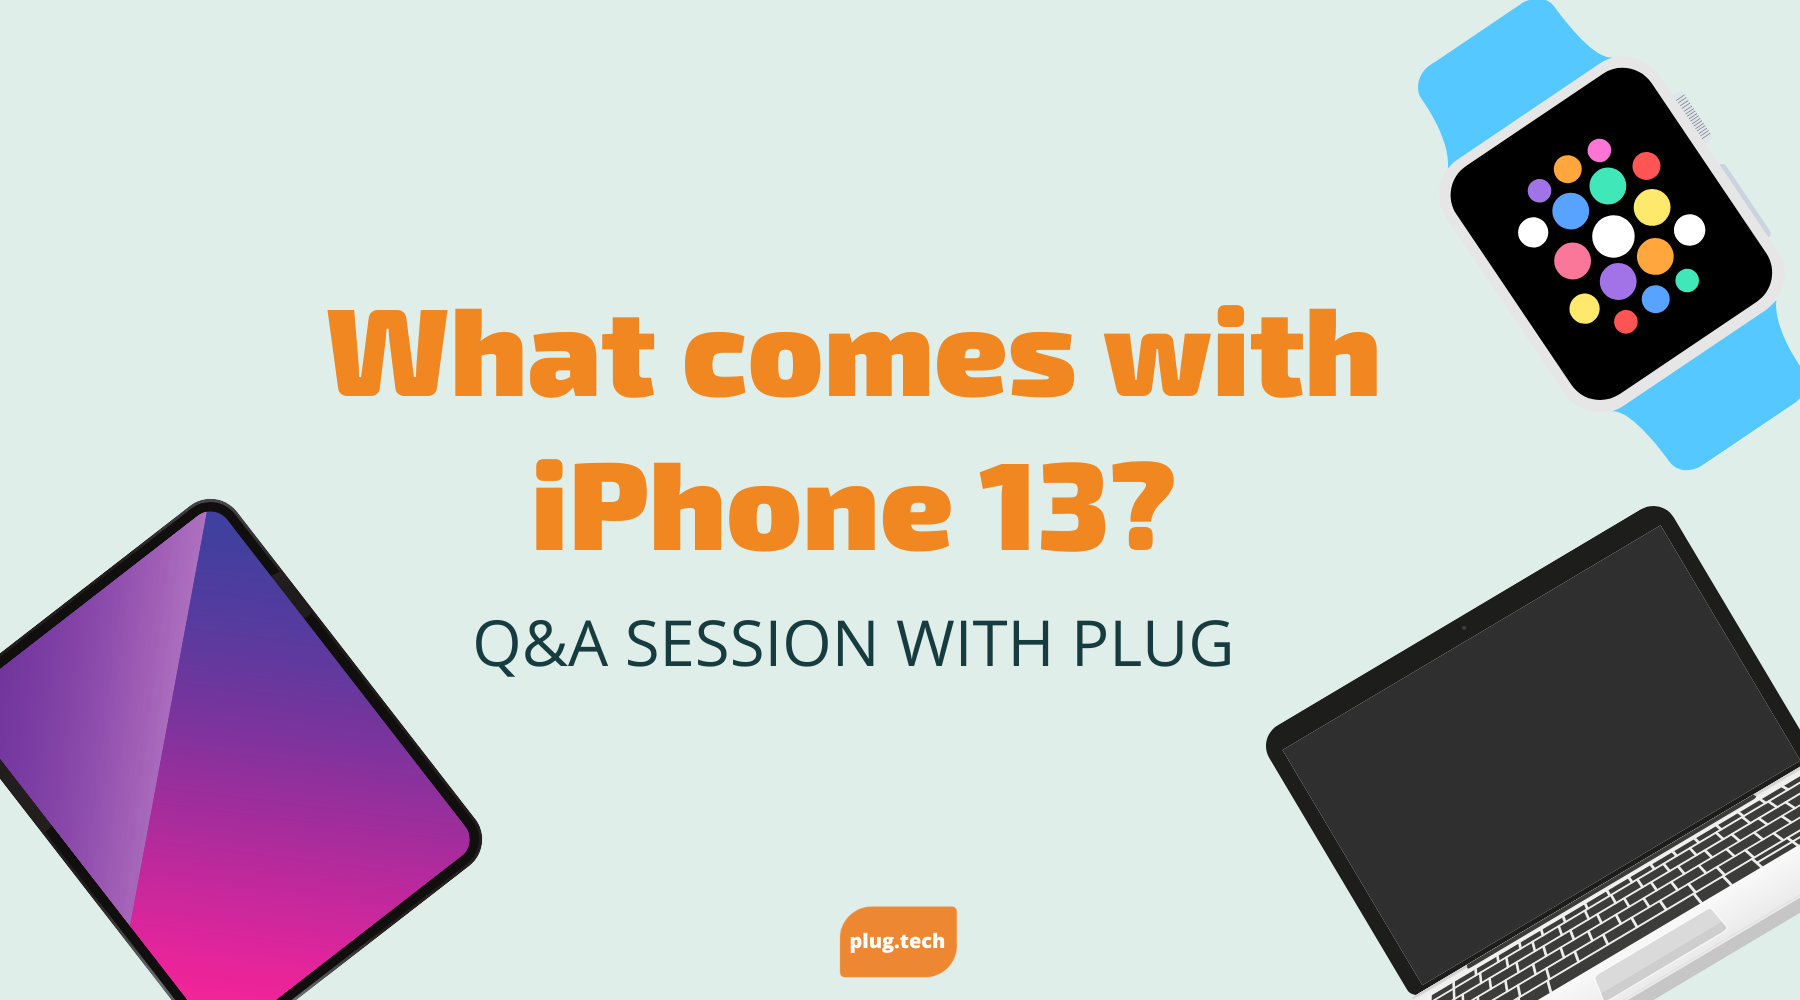 What comes with iPhone 13?